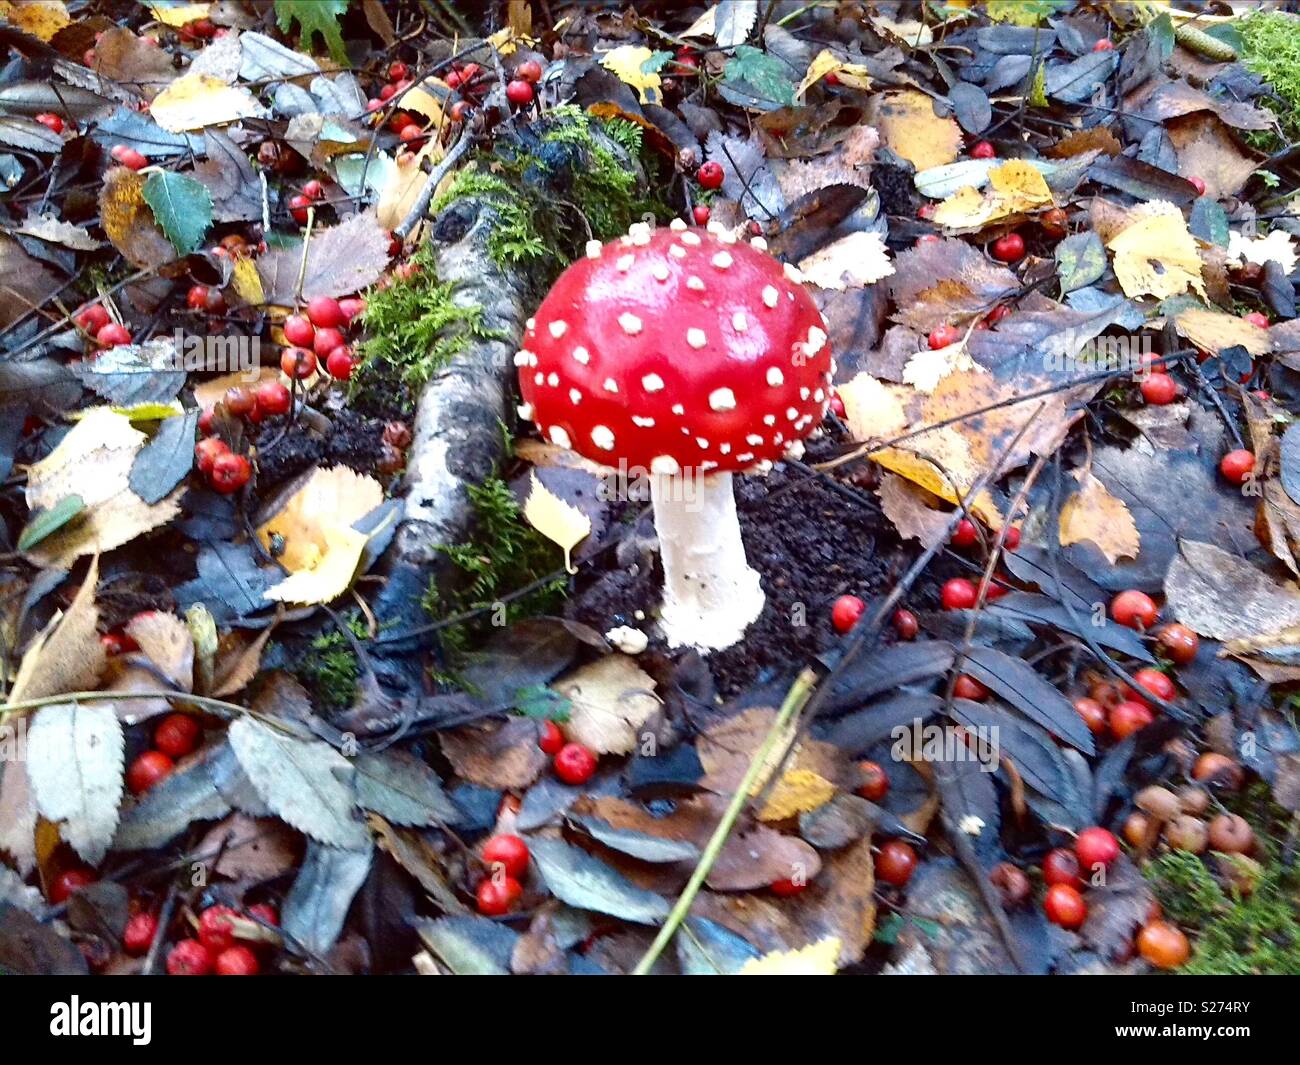 Red spotted mushroom Fly Agaric or Amanita Muscaria in an autumn woodland setting with leaves on the ground. Stock Photo